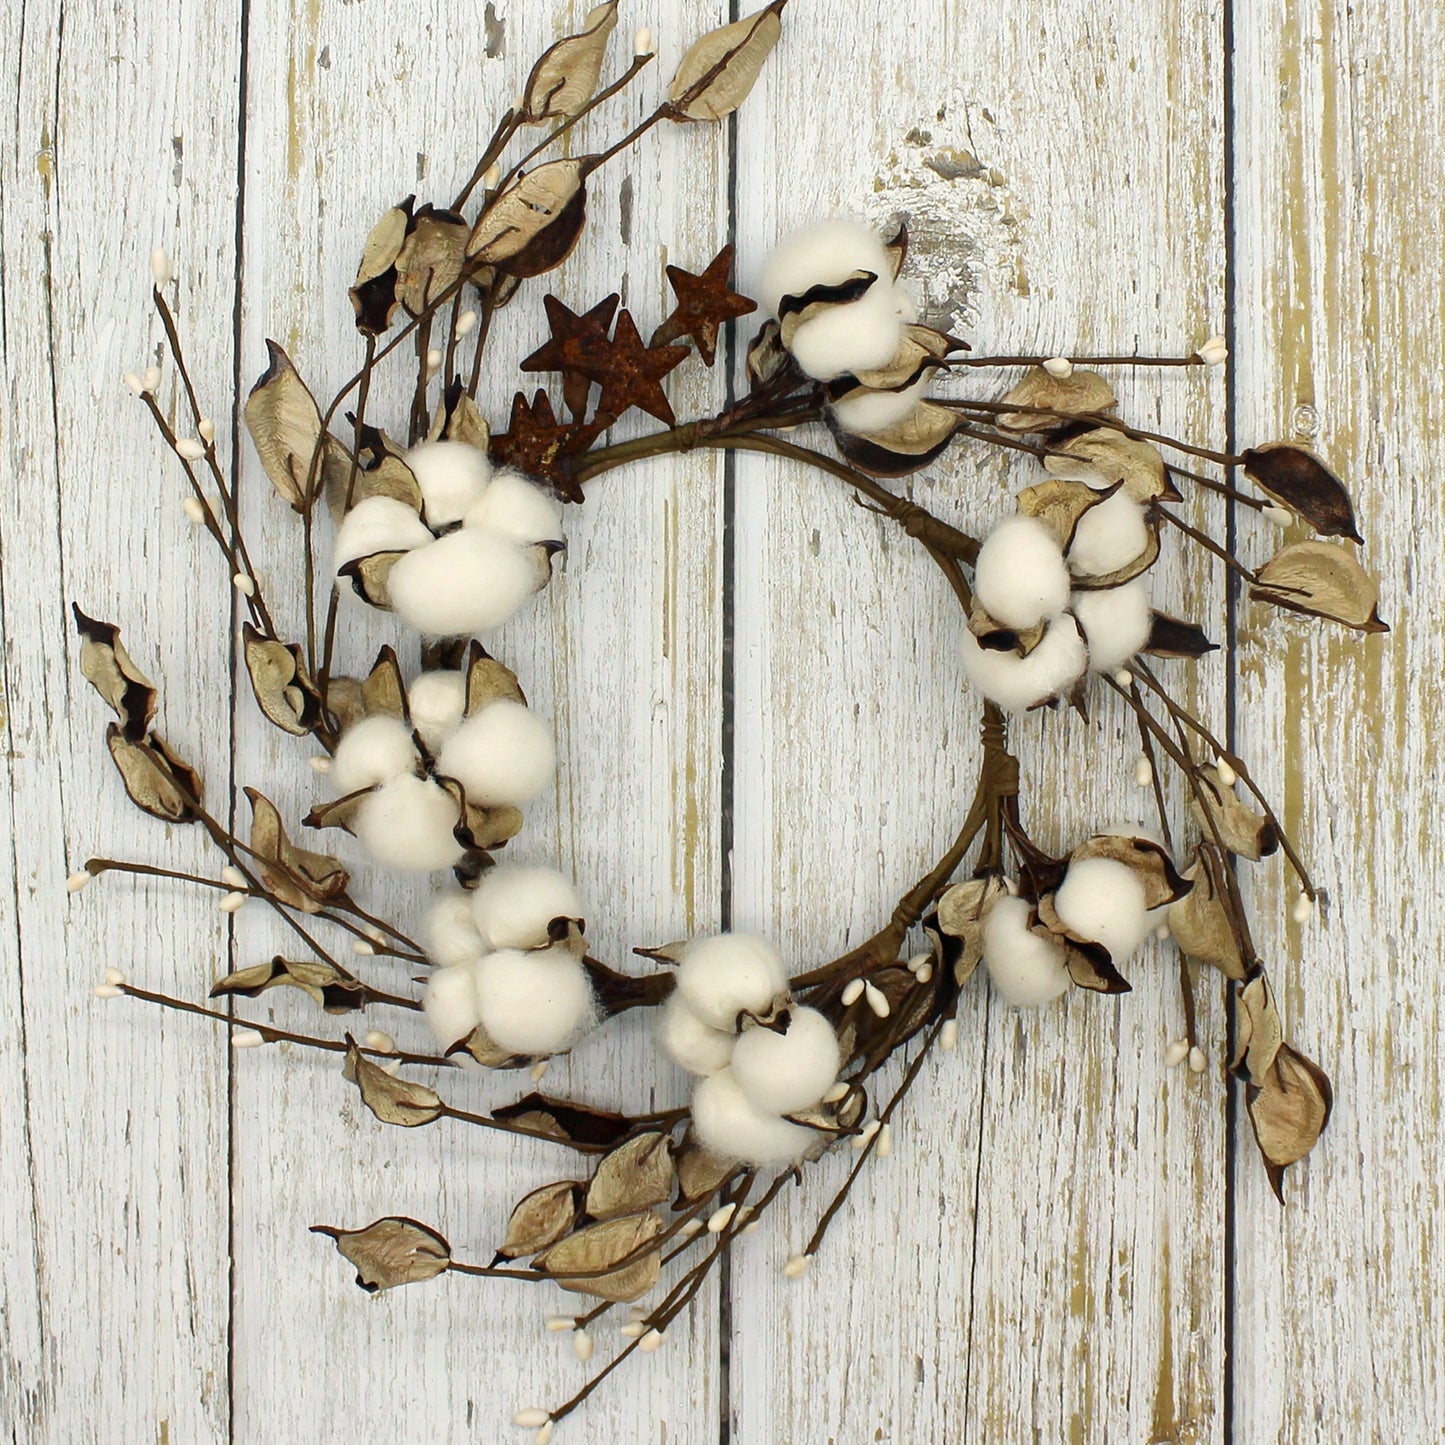 CVHOMEDECO. Primitives Rustic Cotton Pod Pip Berries and Autumn Leaves with Rusty Barn Stars Wreath, 14 Inch